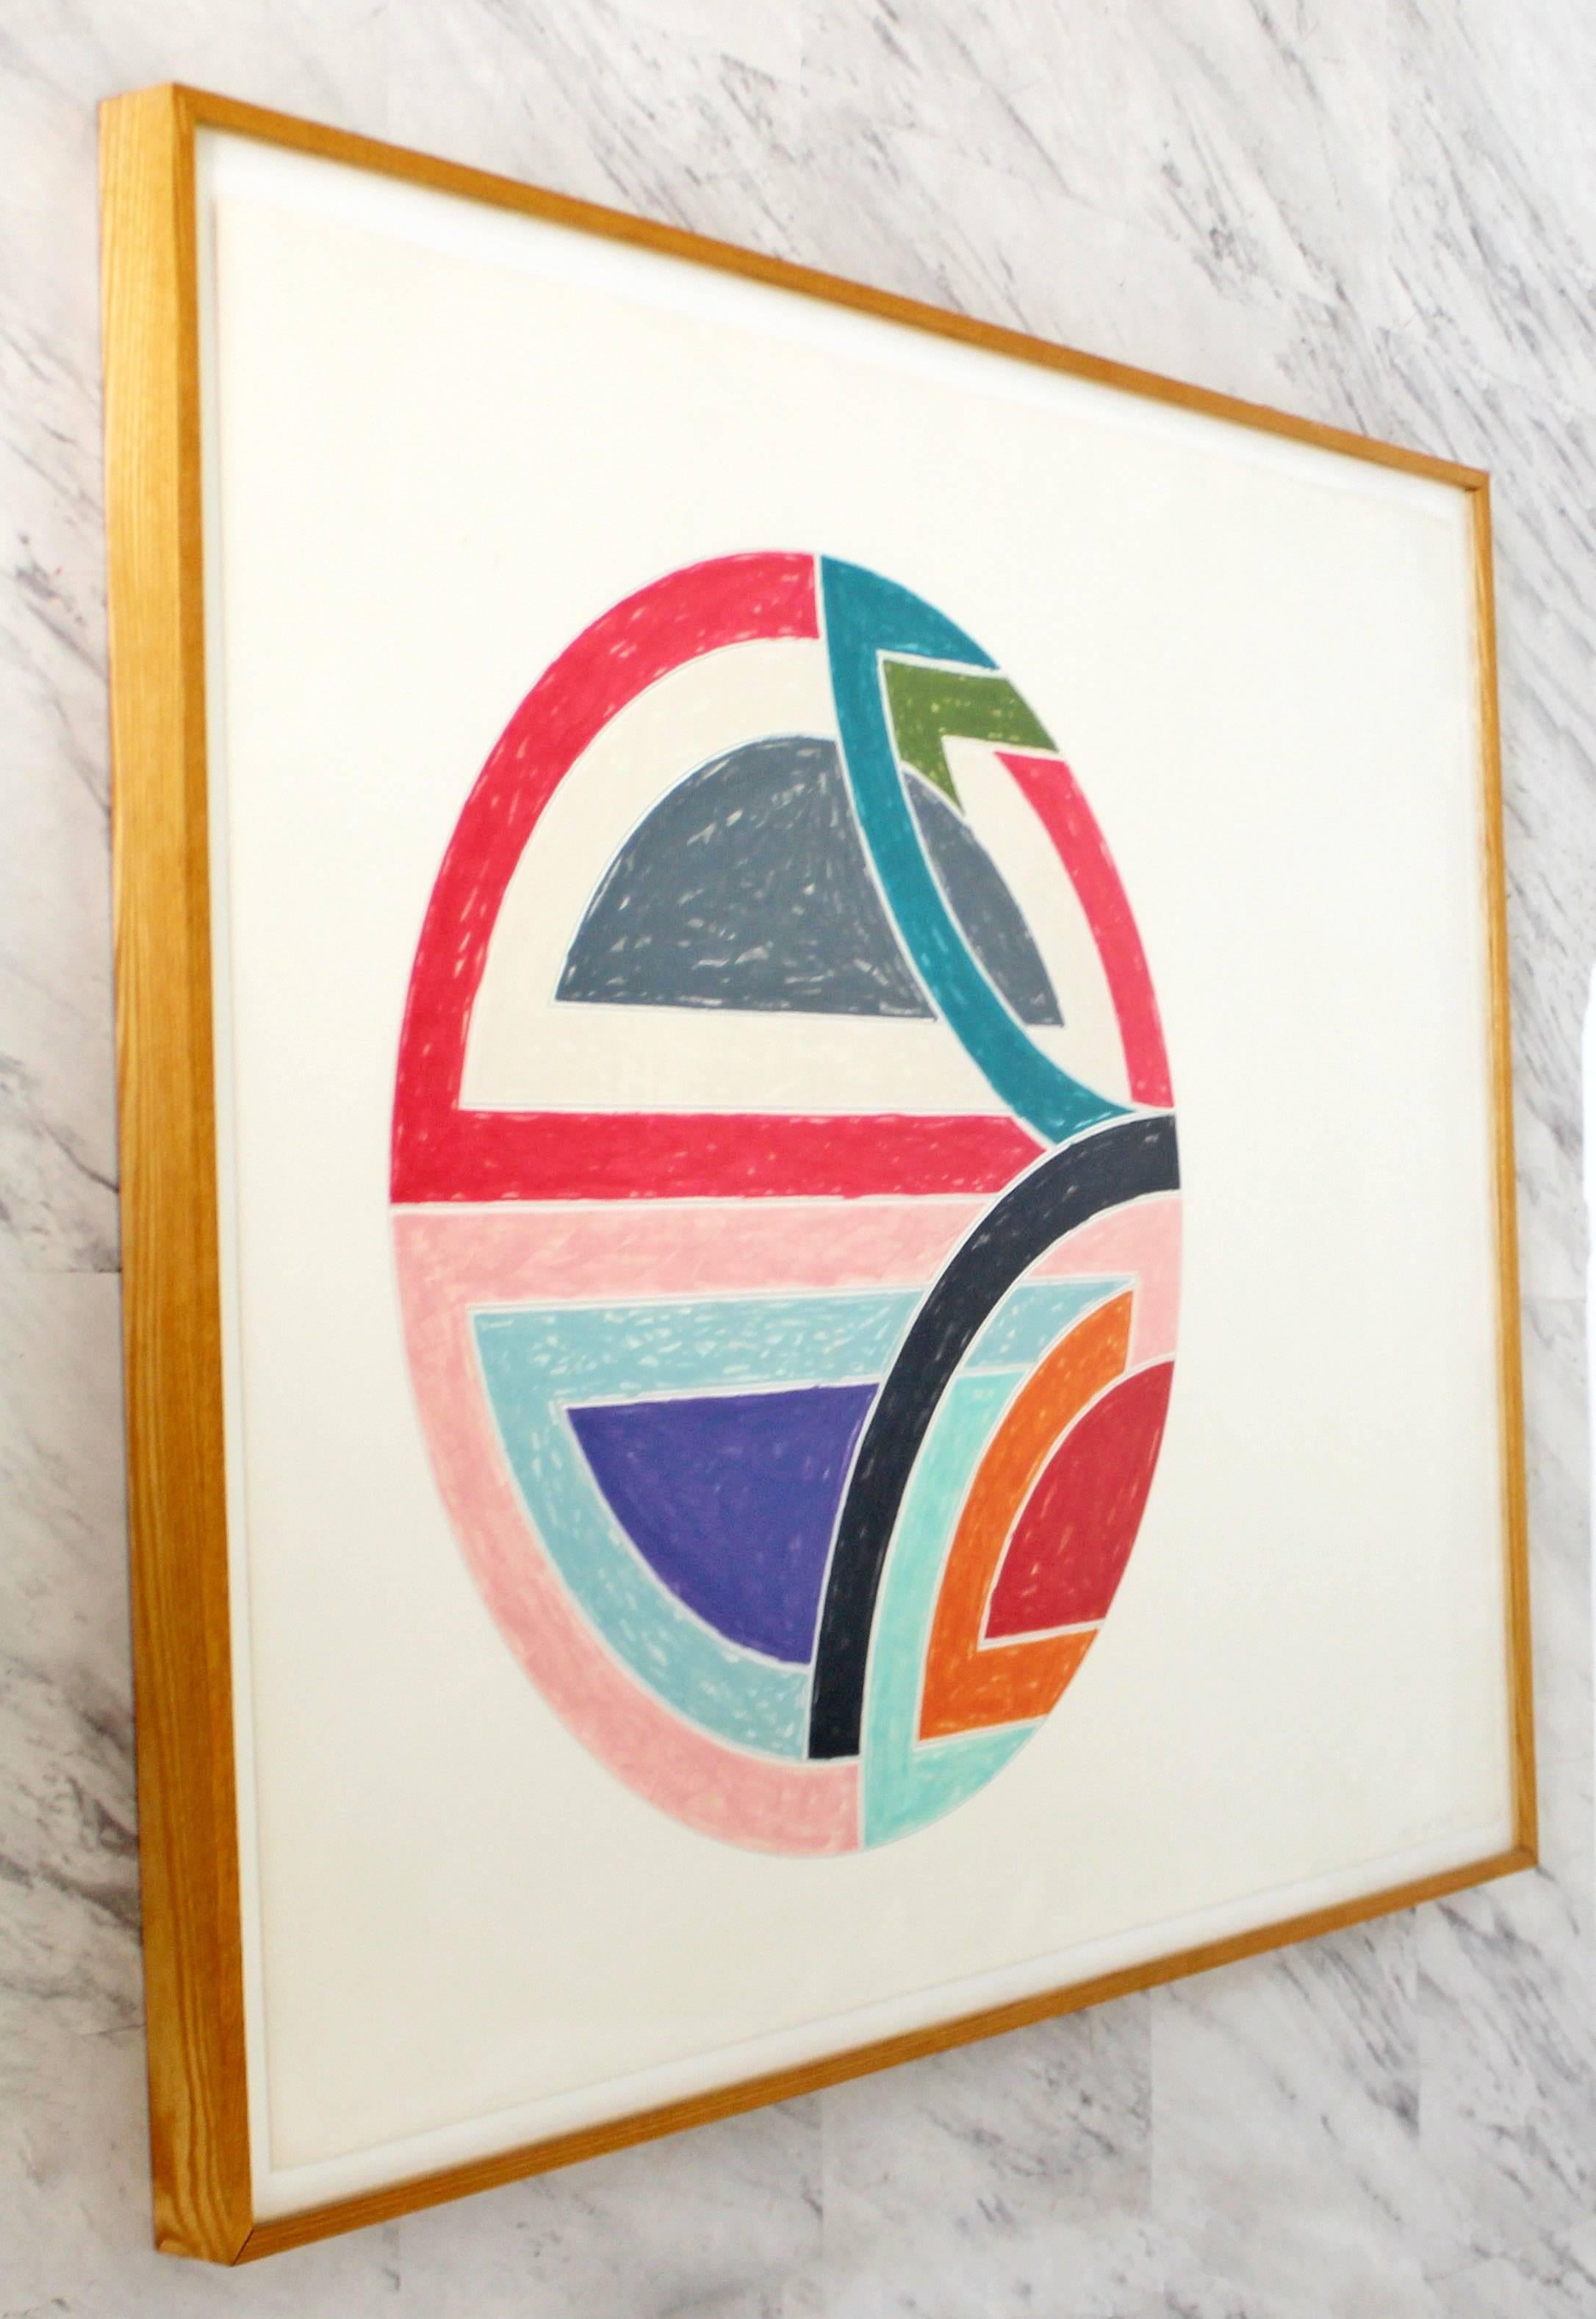 For your consideration is a gorgeous, framed lithograph of Frank Stella's 